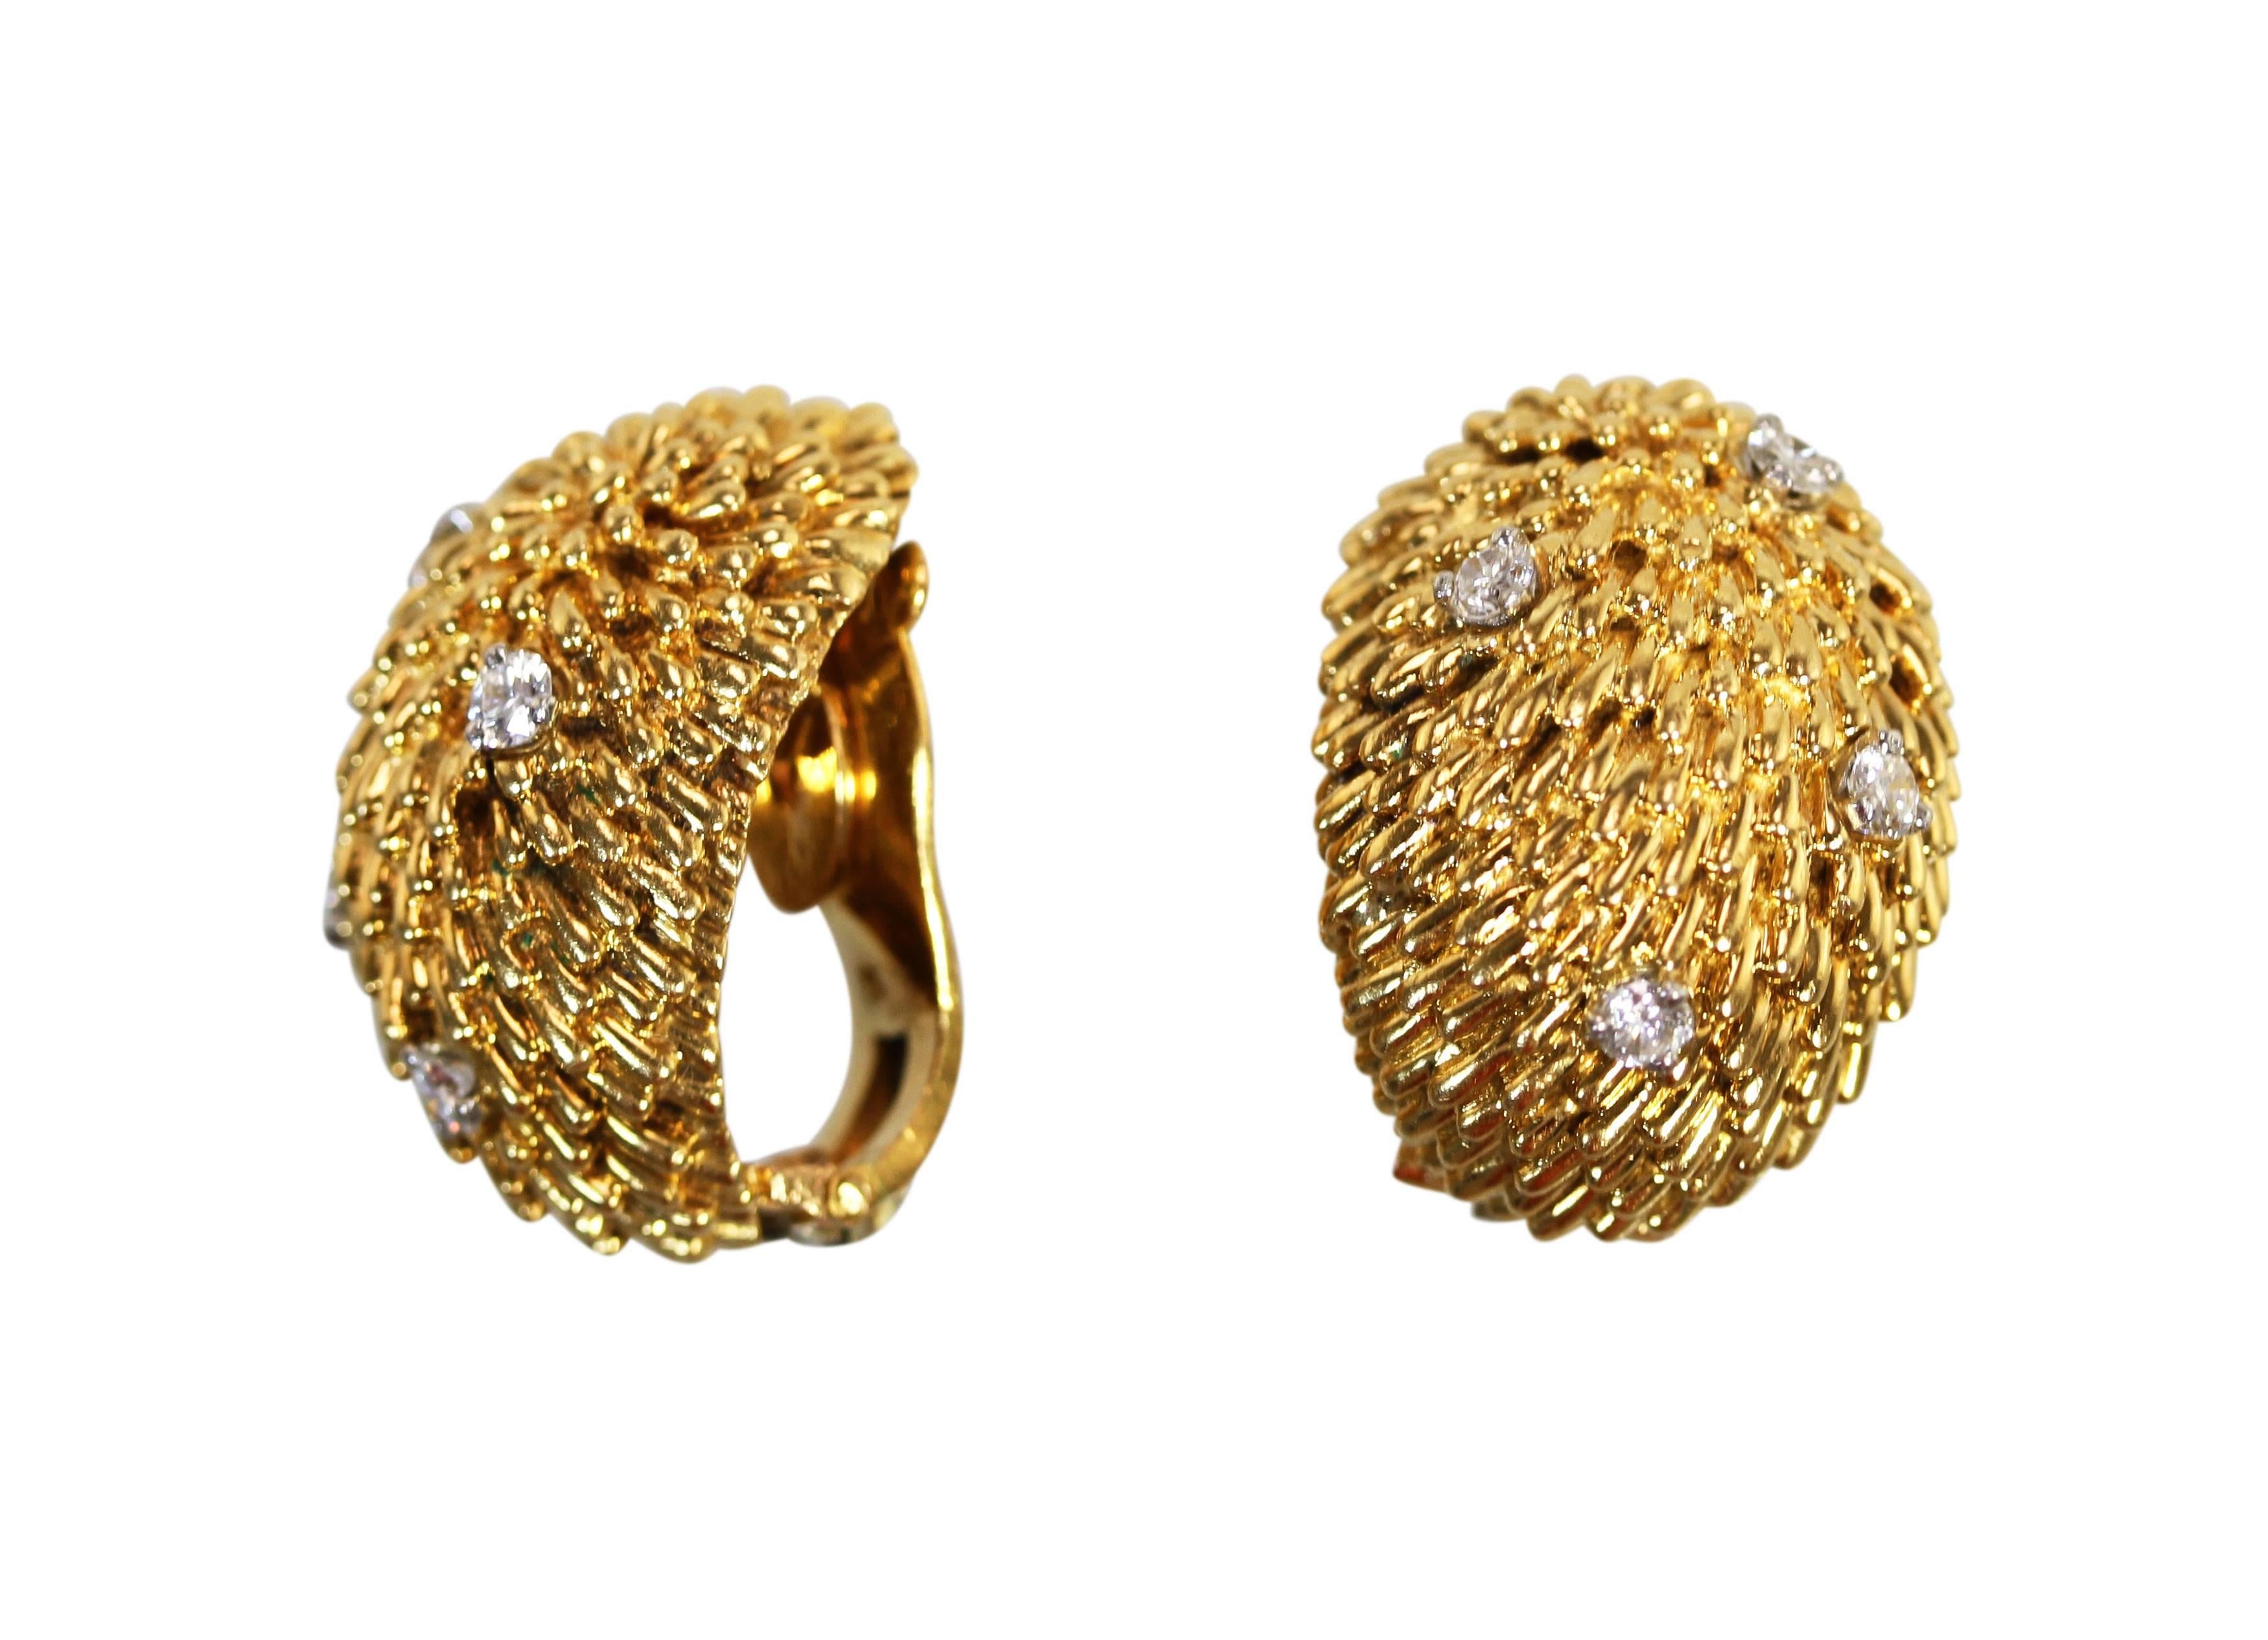 A pair of 18 karat yellow gold and diamond earclips by Van Cleef & Arpels, France, circa 1960, of bombe textured gold design set with 8 round diamonds weighing approximately 0.40 carat, measuring 7/8 by 5/8, gross weight 23.0 grams, signed Van